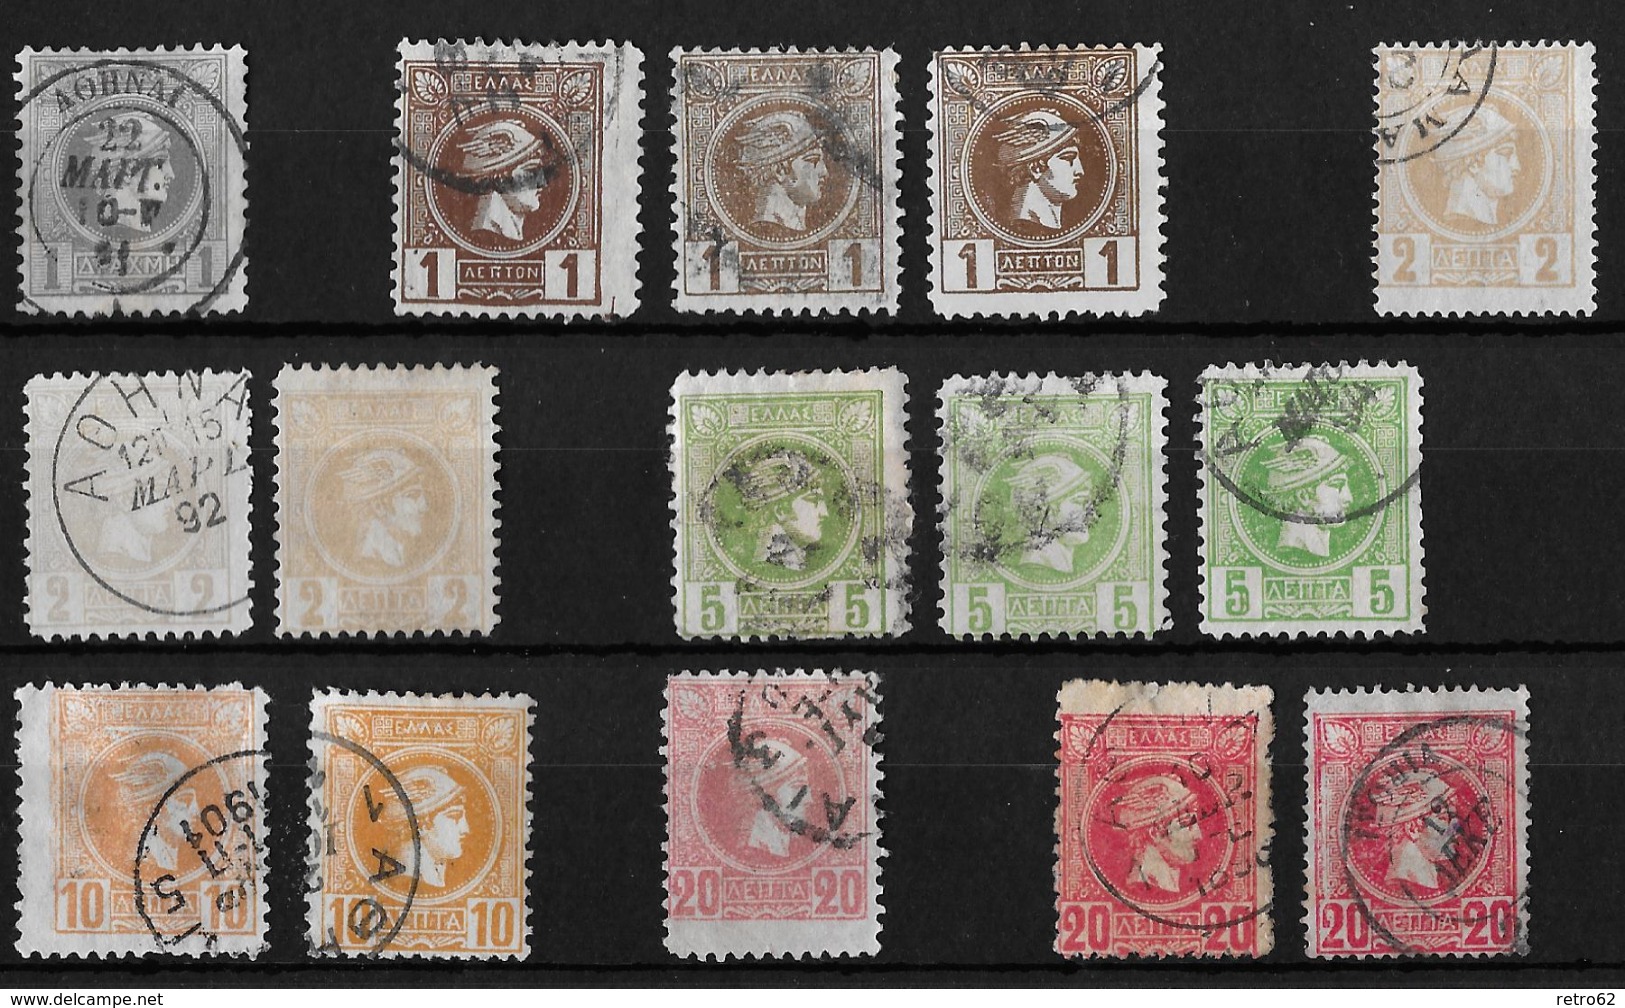 1886-1901 Hermes, Klein &rarr; GREECE SMALL HERMES HEAD 1, 2, 5, 10, 20 L USED - Used Stamps